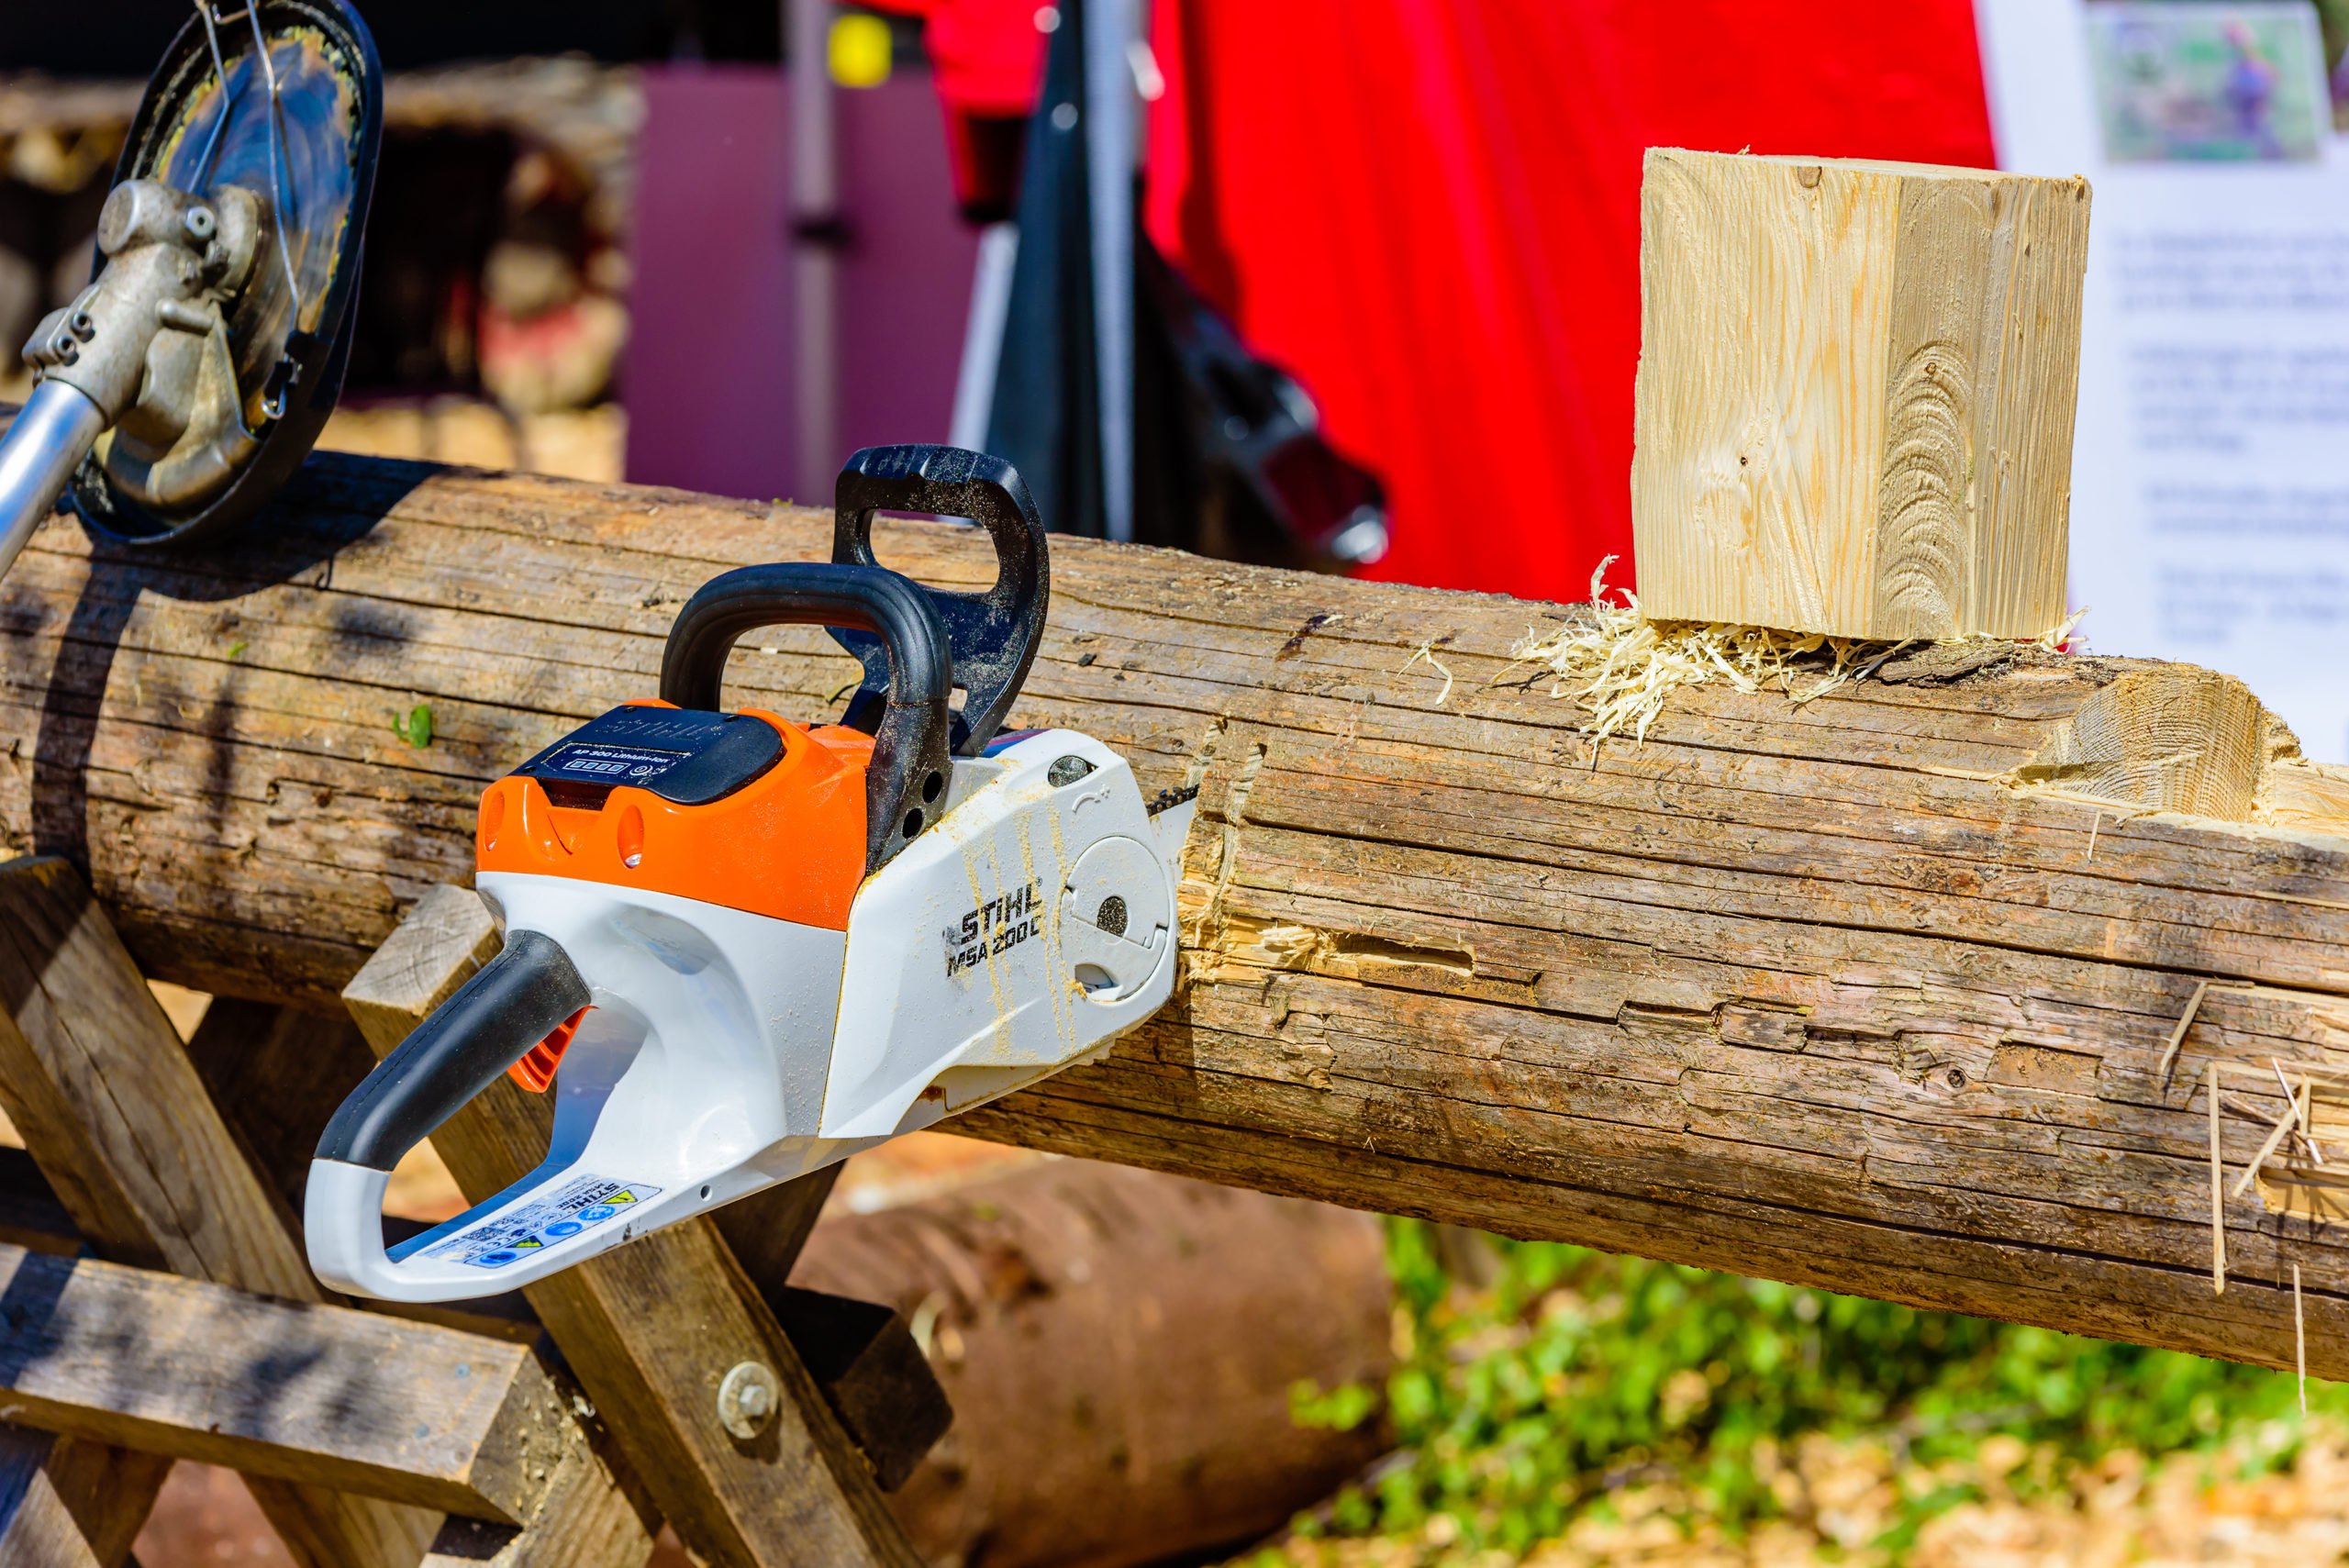 The power of a battery powered tool is helpful for both the landscaping job and the environment. 